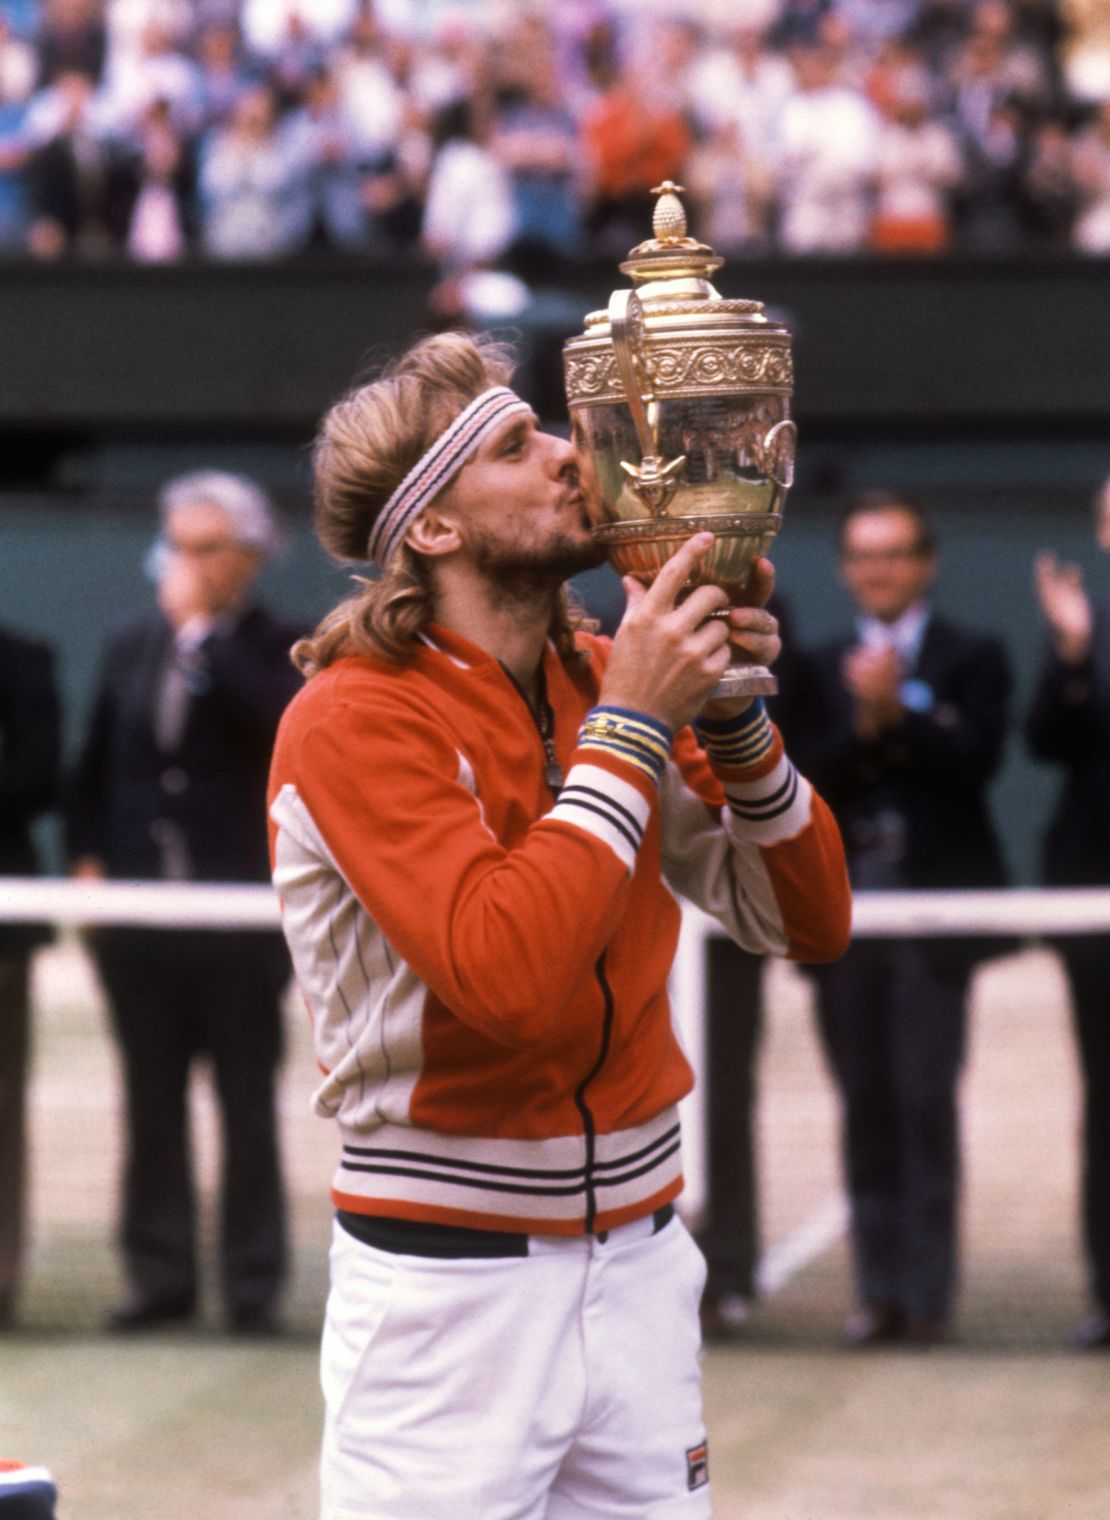 Bjorn Borg: I quit because I wanted another life away from tennis